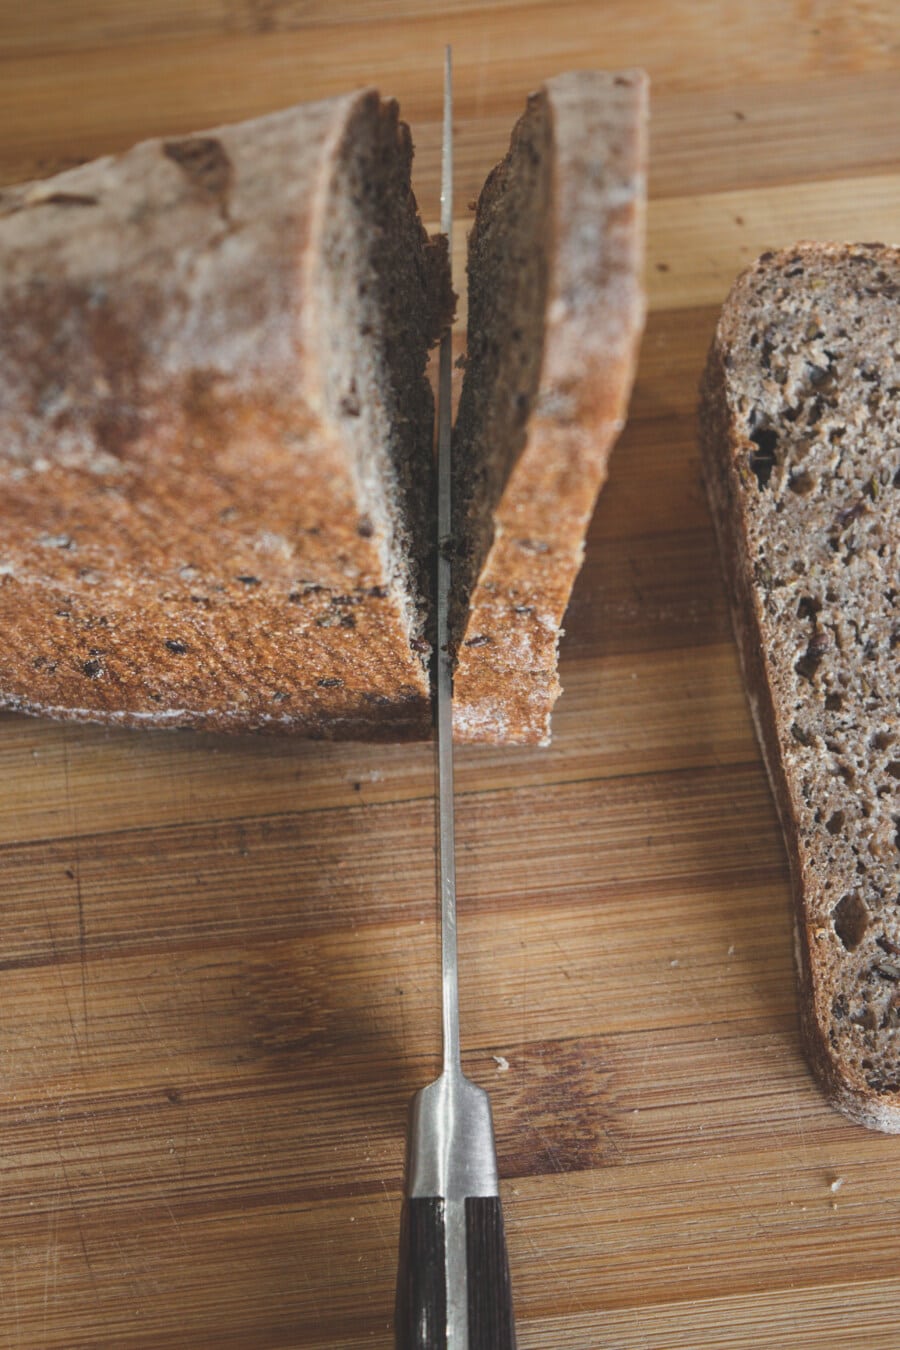 knife, slicing, slice, wholemeal bread, bread, close-up, kitchen table, wood, flour, sharp